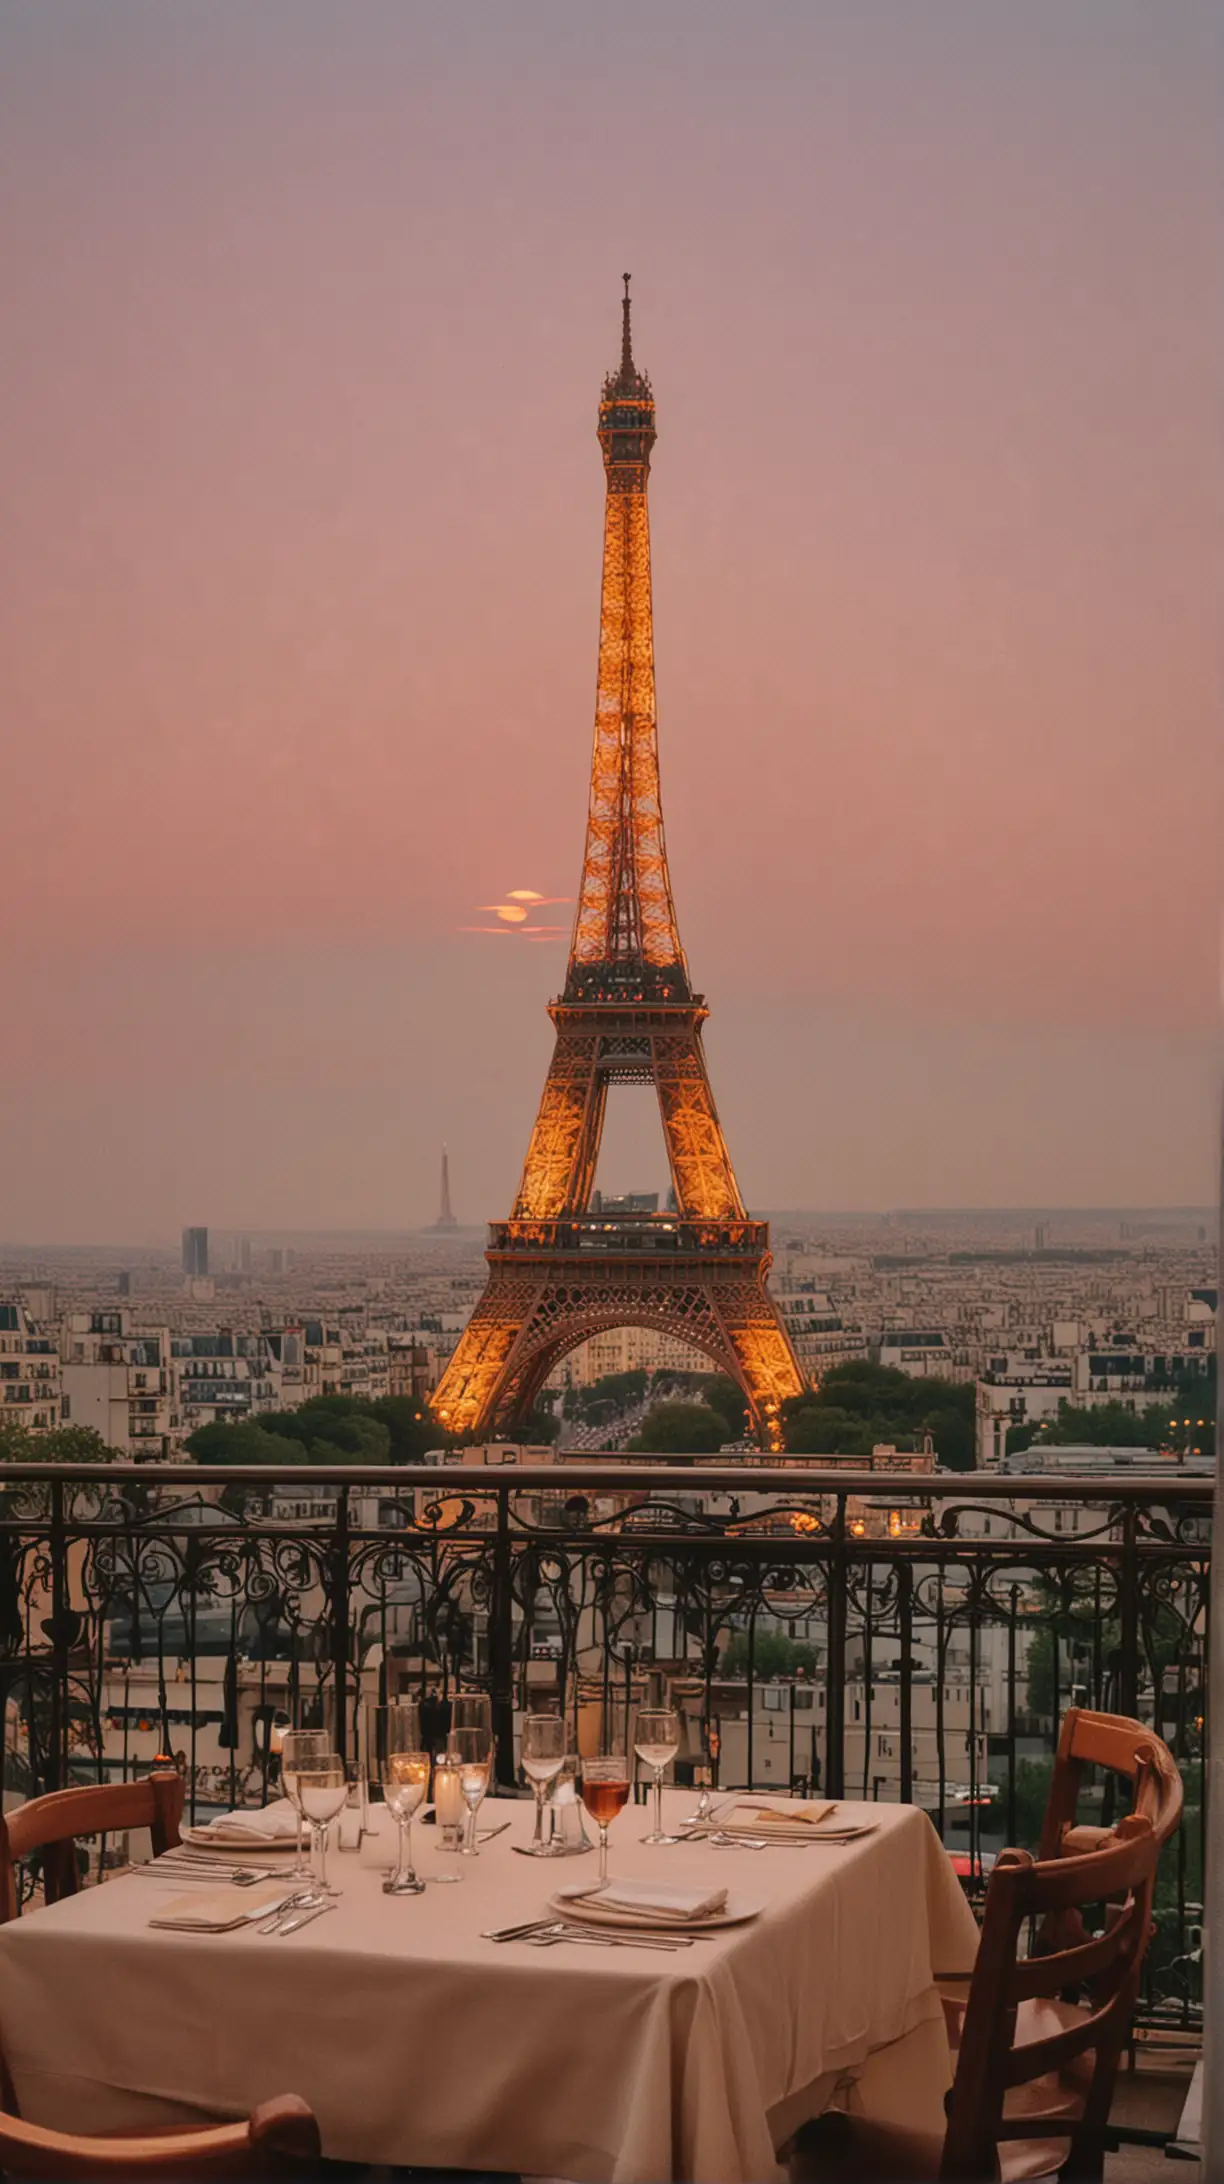 Retro Parisian Dining with Eiffel Tower Sunset View